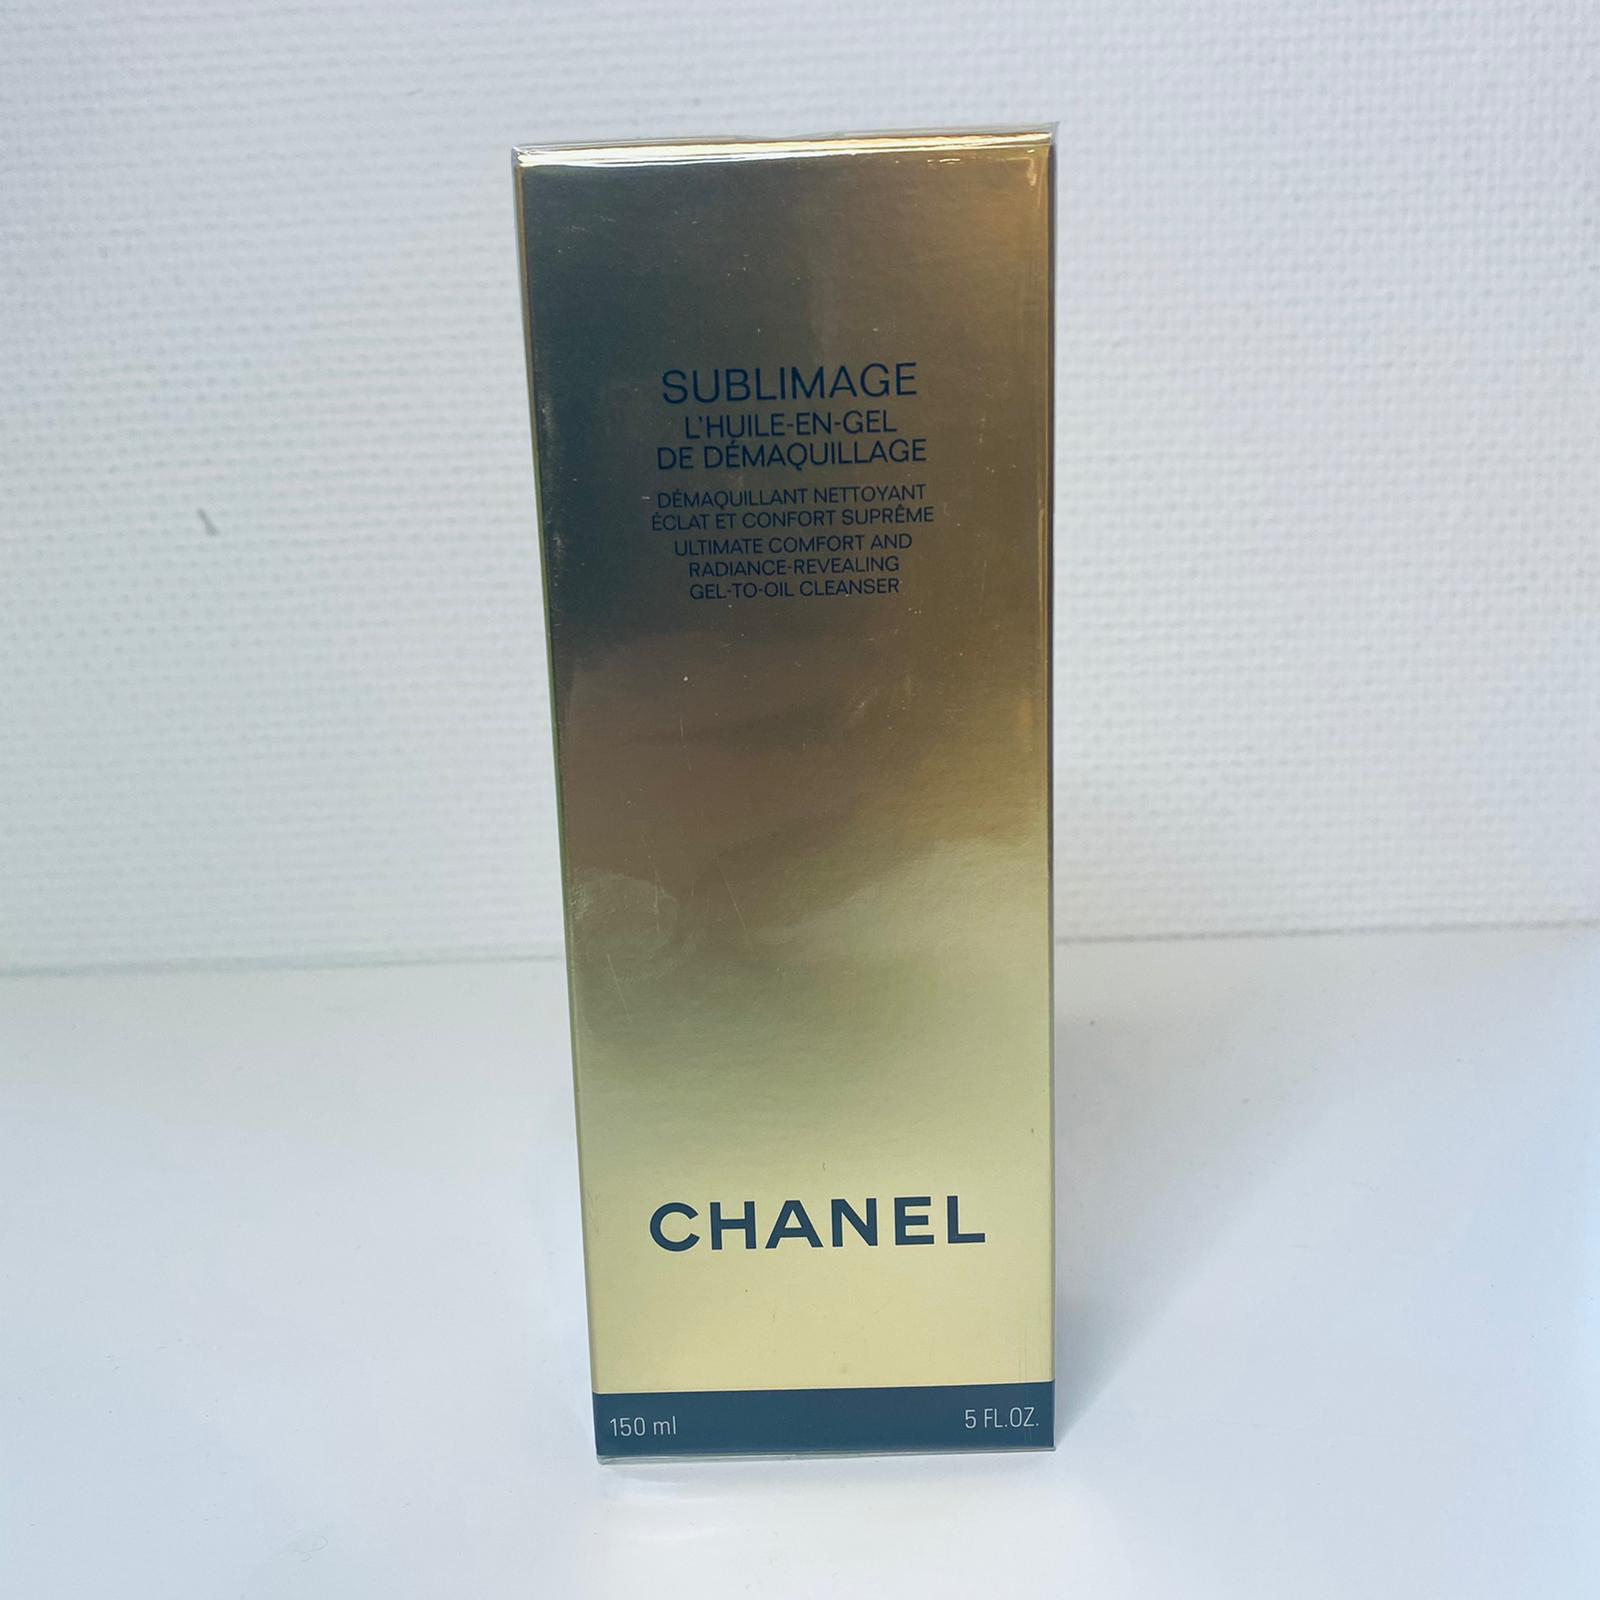 Chanel Sublimage gel to oil cleanser 150 ml